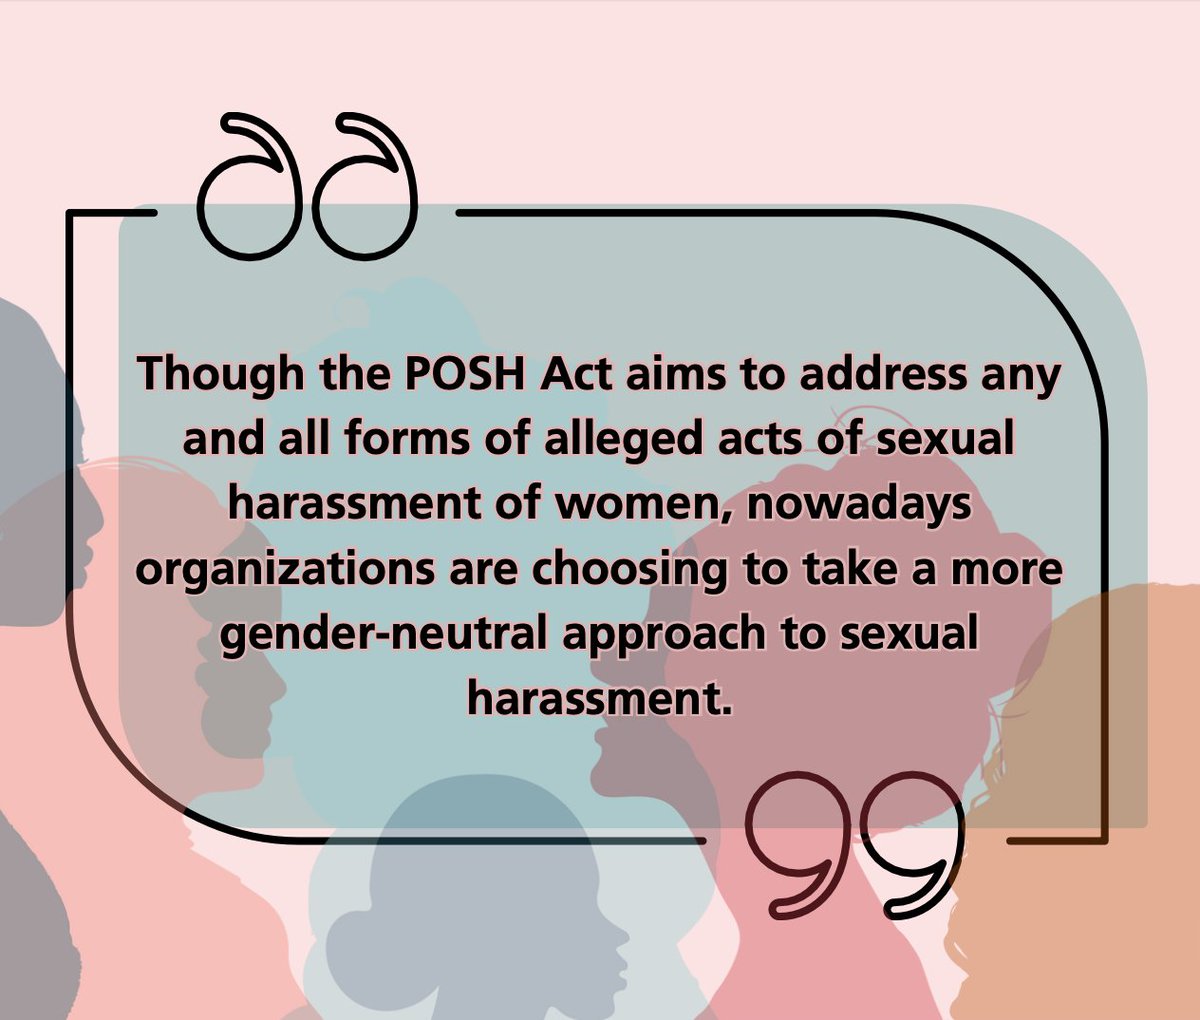 Are Women the Sole Focus of Workplace Harassment Protection? 

Unveiling the Gender-Inclusive Approach in our #POSHThursdays post for today!

#POSH #startup #privatecompanies #sexualharassment #workplaceharassment #founders #enterpreneurs #workplacelaw #companylaw